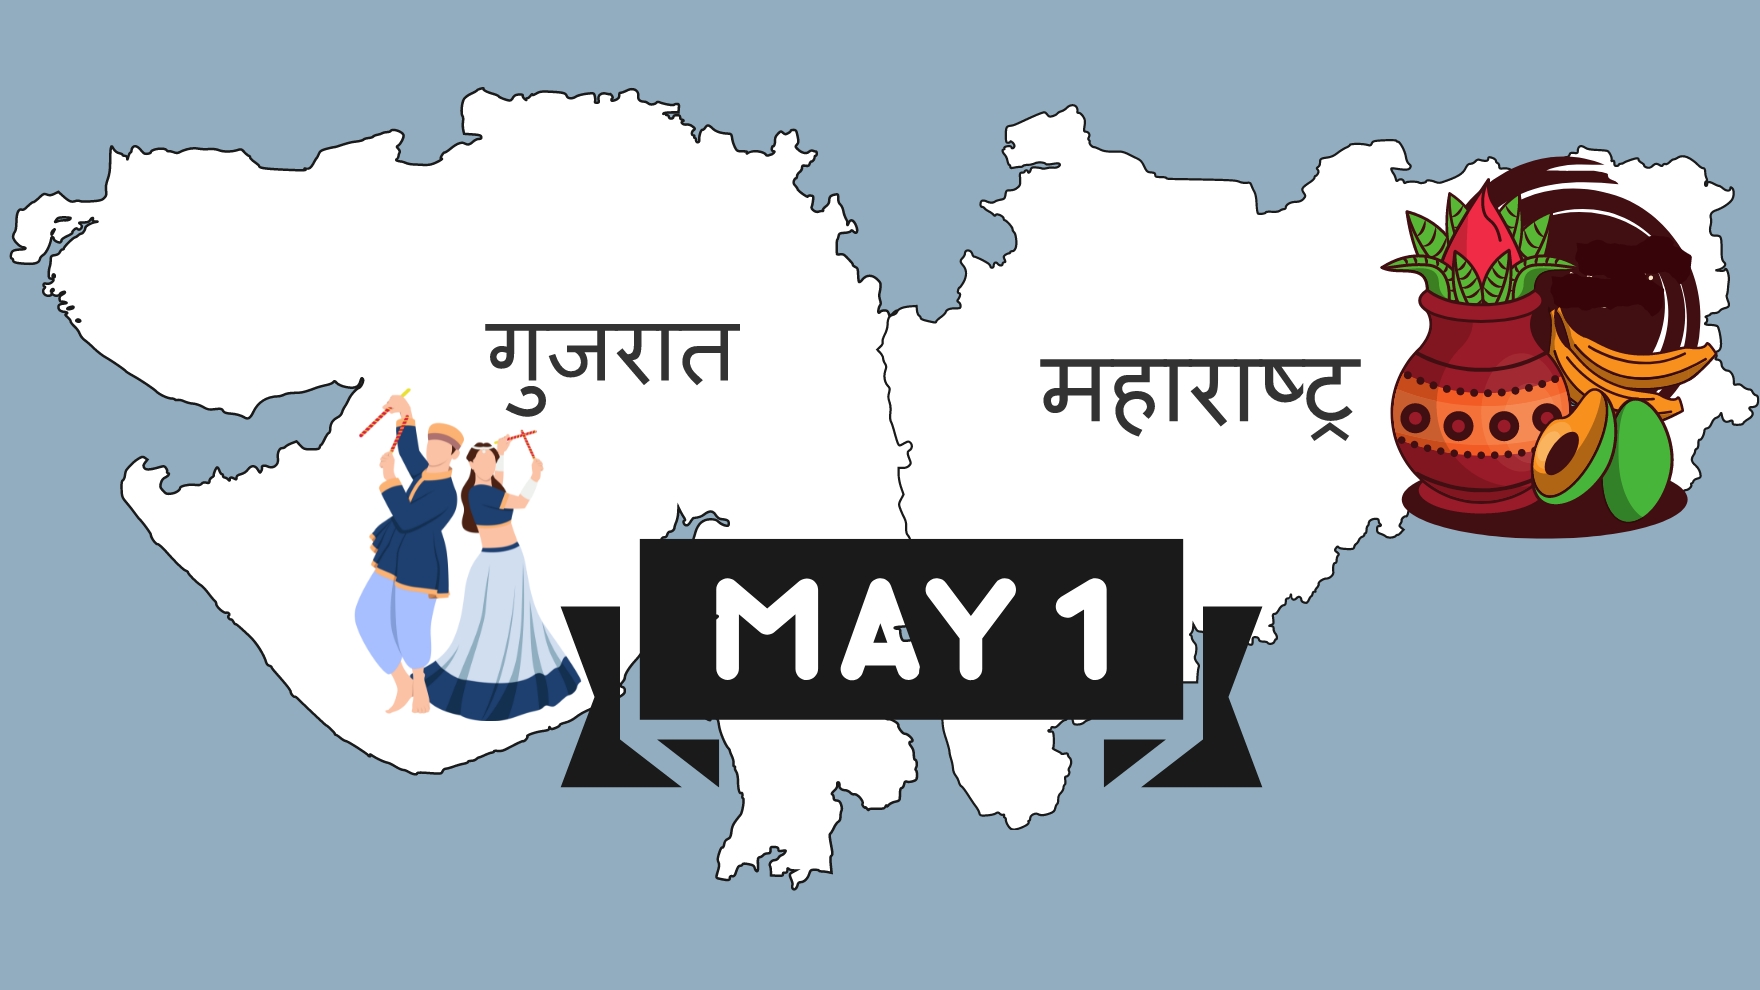 Why we celebrate Gujarat Day and Maharashtra Day on May 1st?